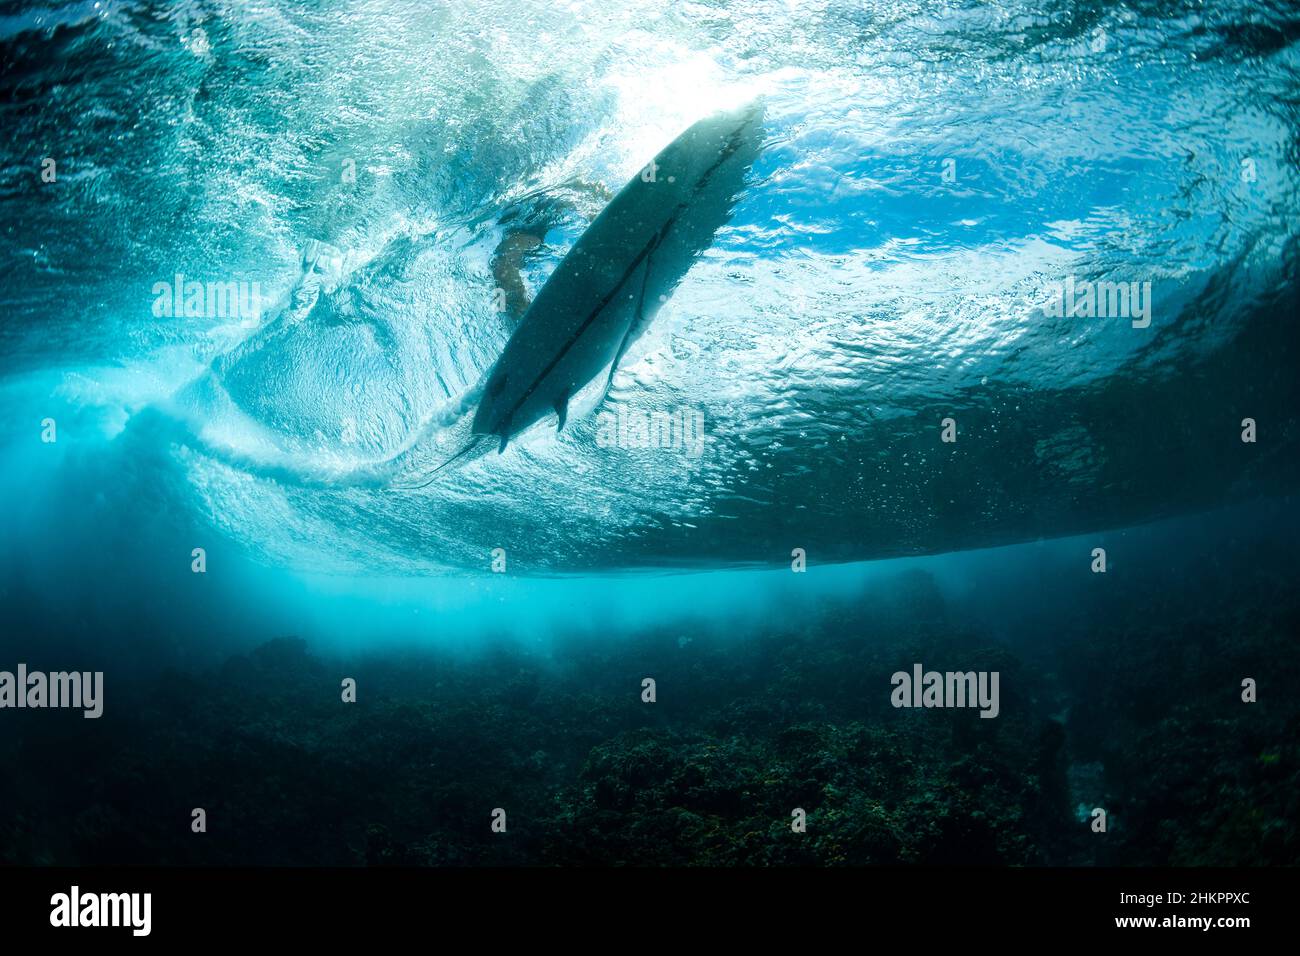 Underwater view of surfer in clear wave Stock Photo